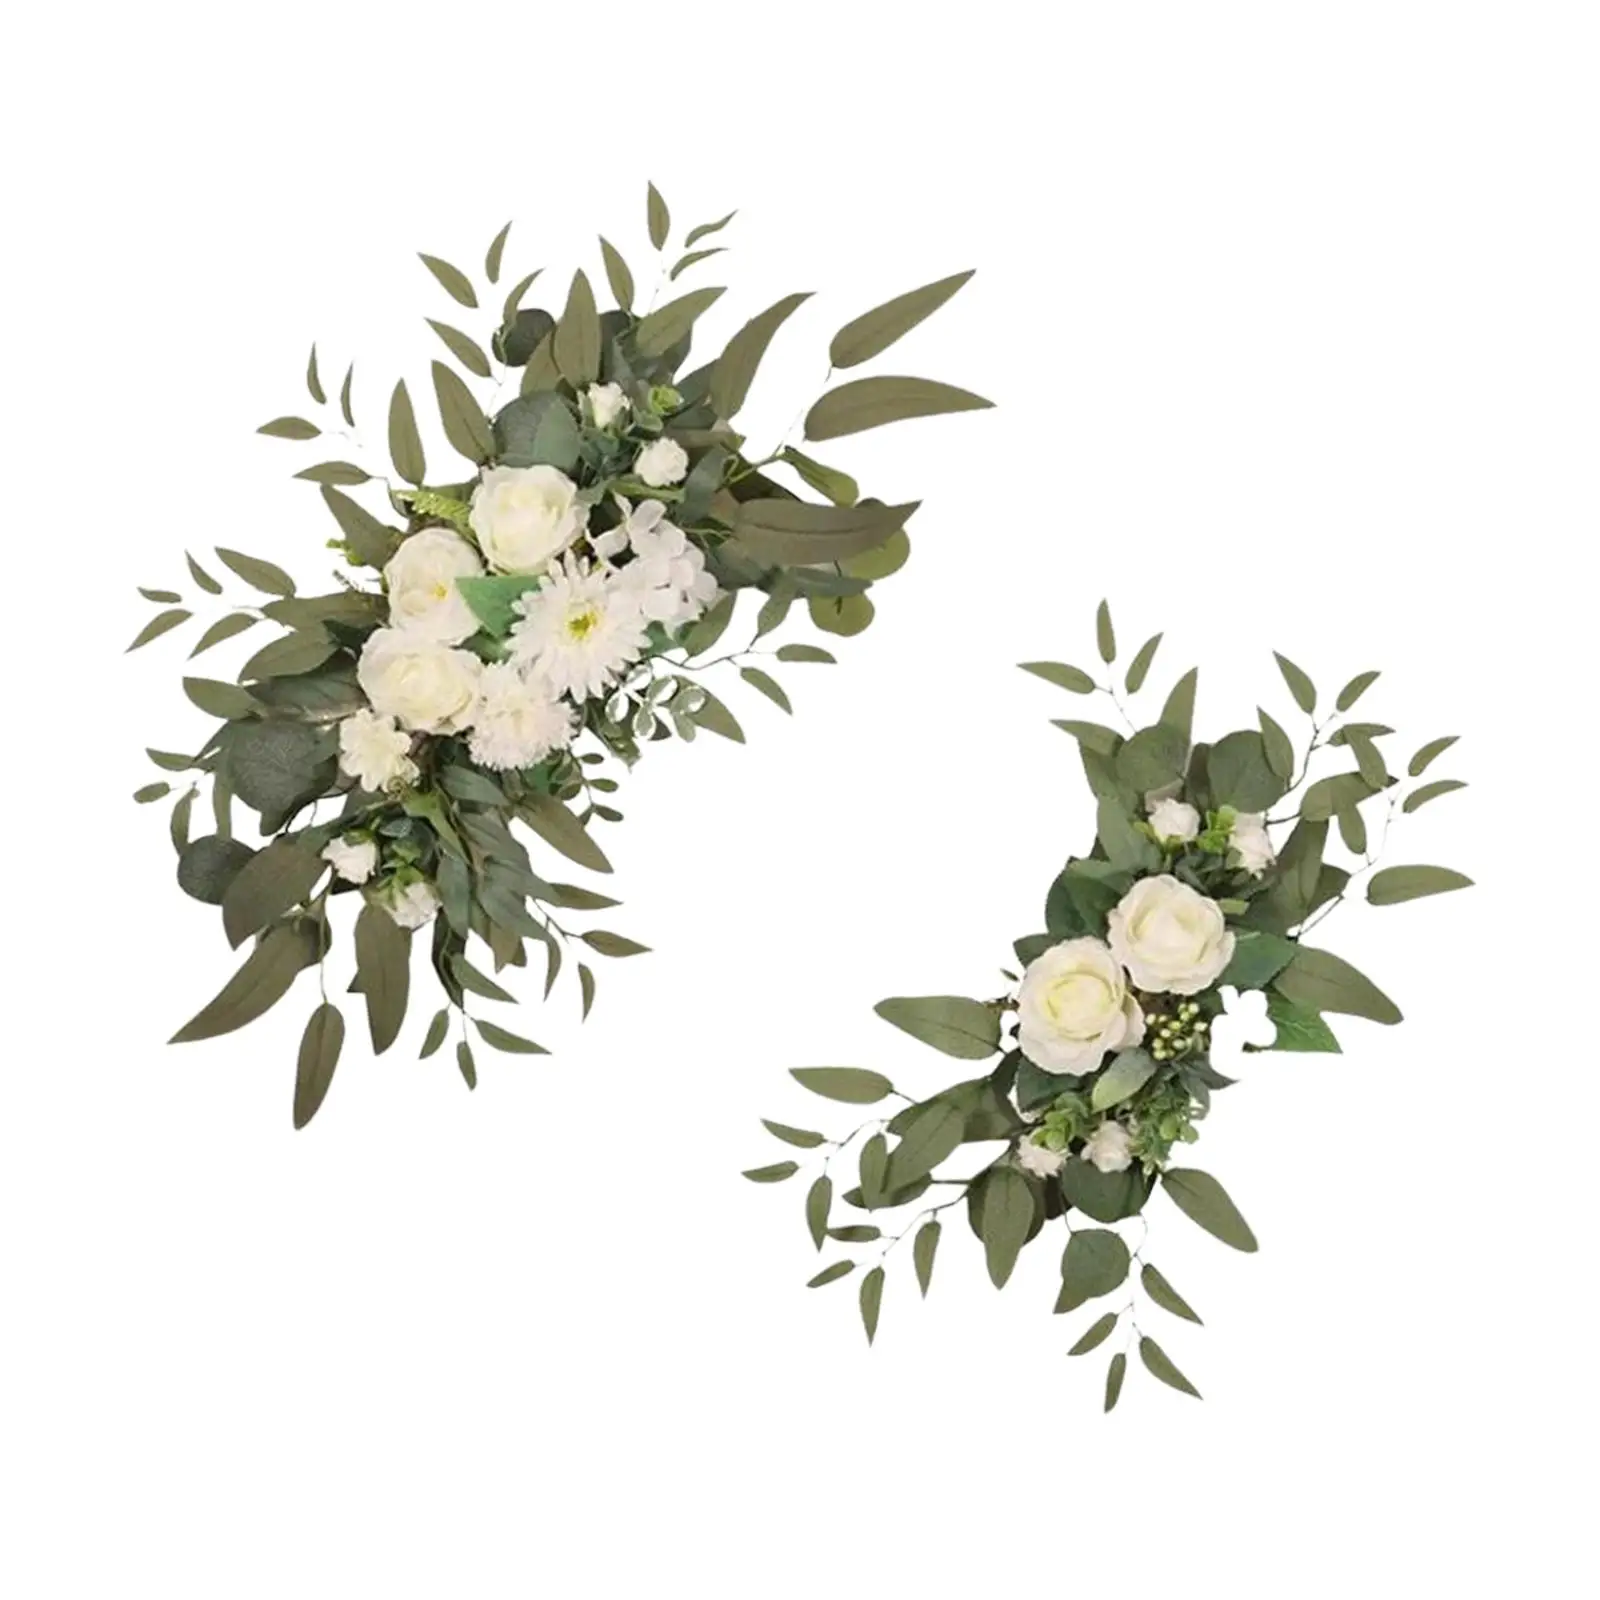 2 Pieces Wedding Arch Flowers Green Leaves Handmade Decorative Floral Swag Floral Wreath for Wall Party Welcome Sign Table Decor